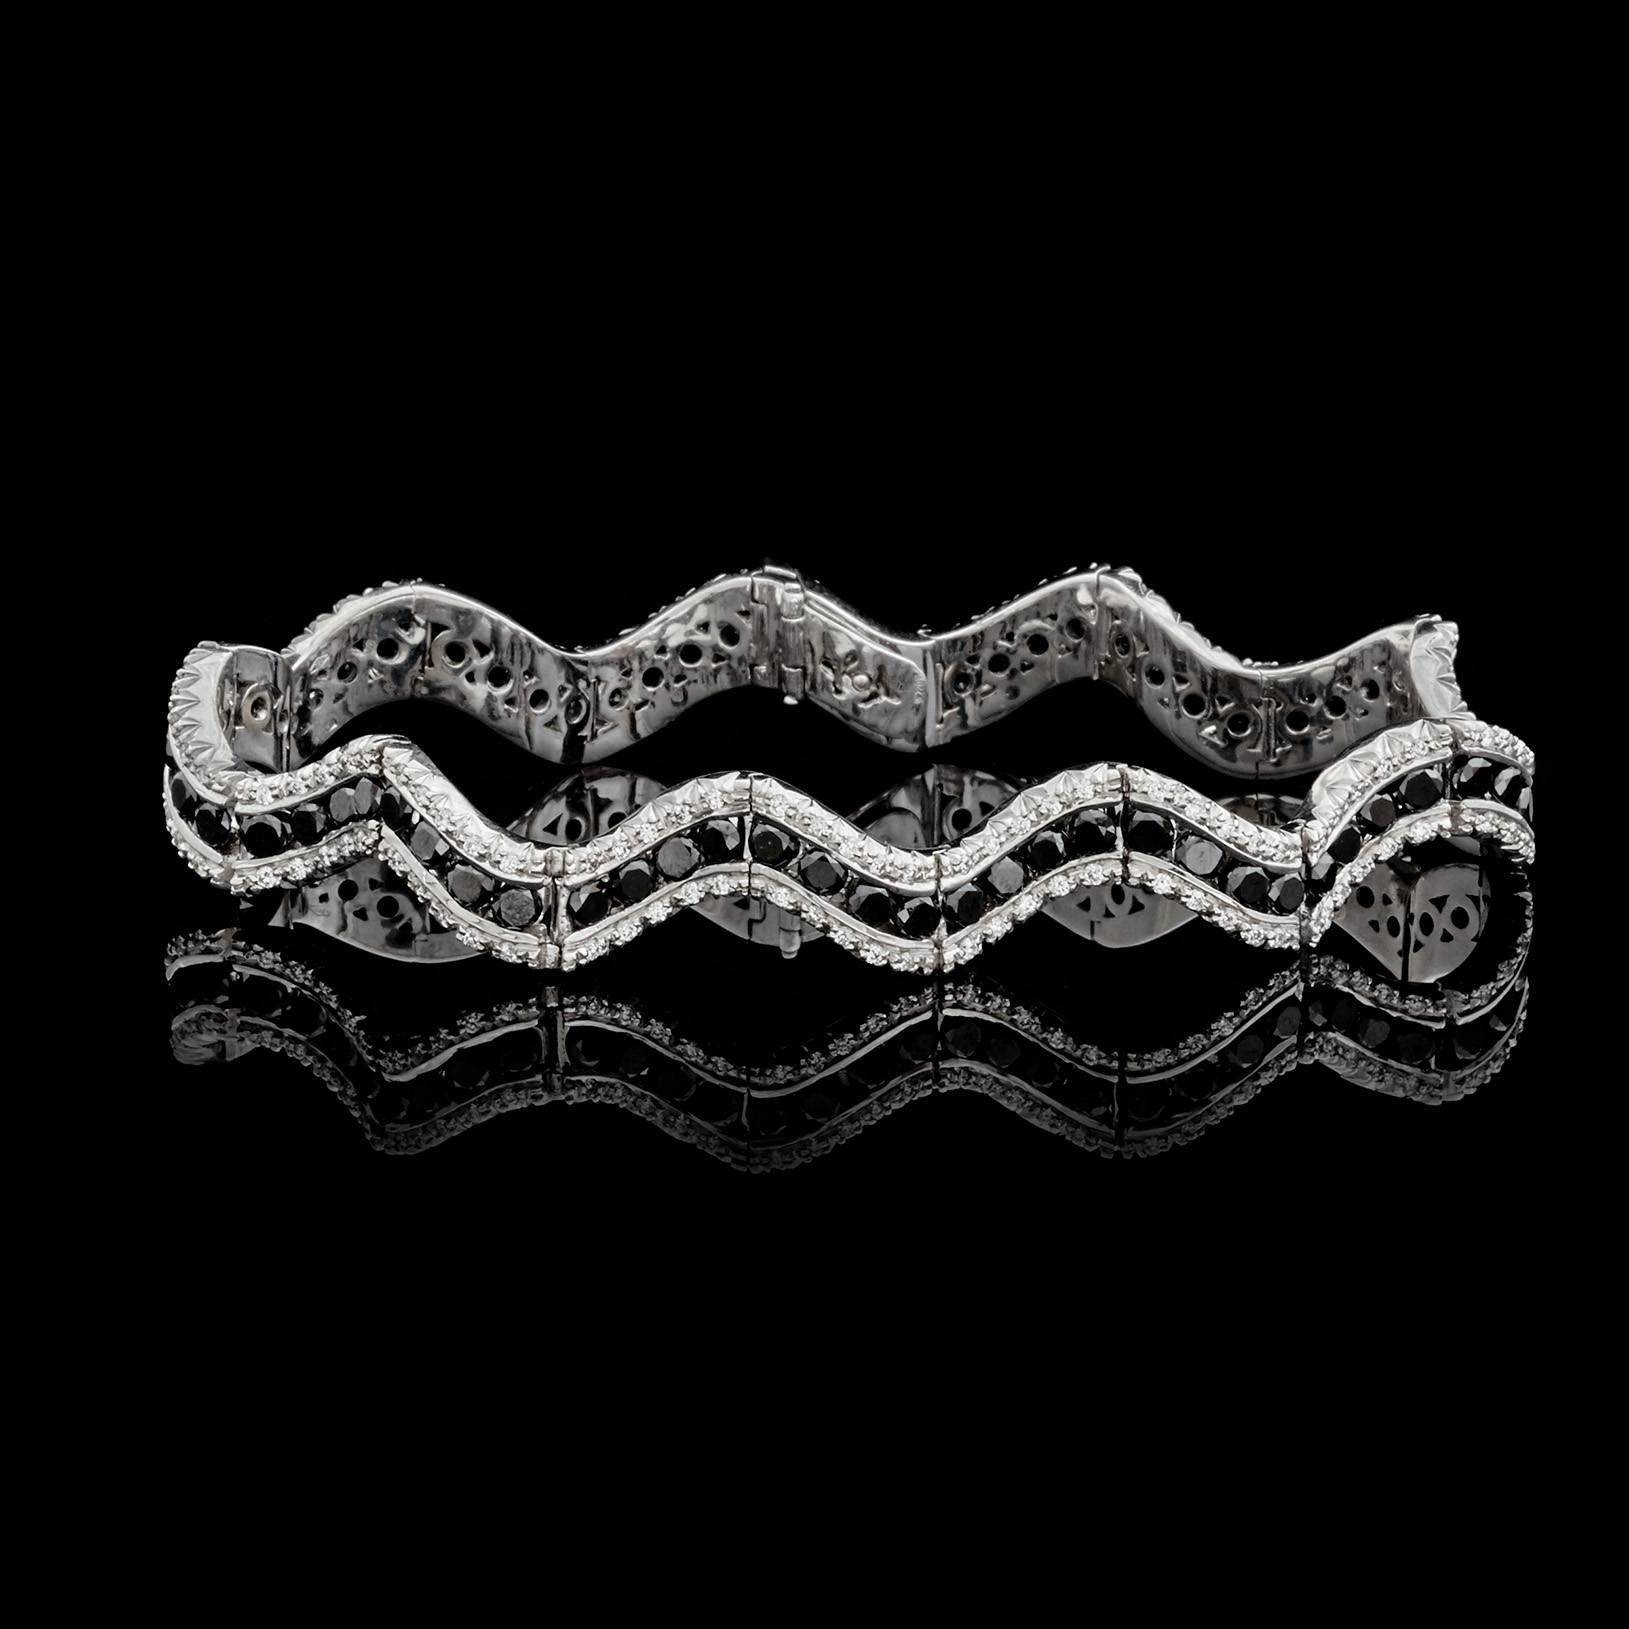 Favero 18k white gold wave design bracelet features 6.72 carats of round brilliant-cut black diamonds, bordered by round brilliant-cut white diamonds weighing in total an estimated 1.21 carats. The stylish design bracelet measures 7 inches in